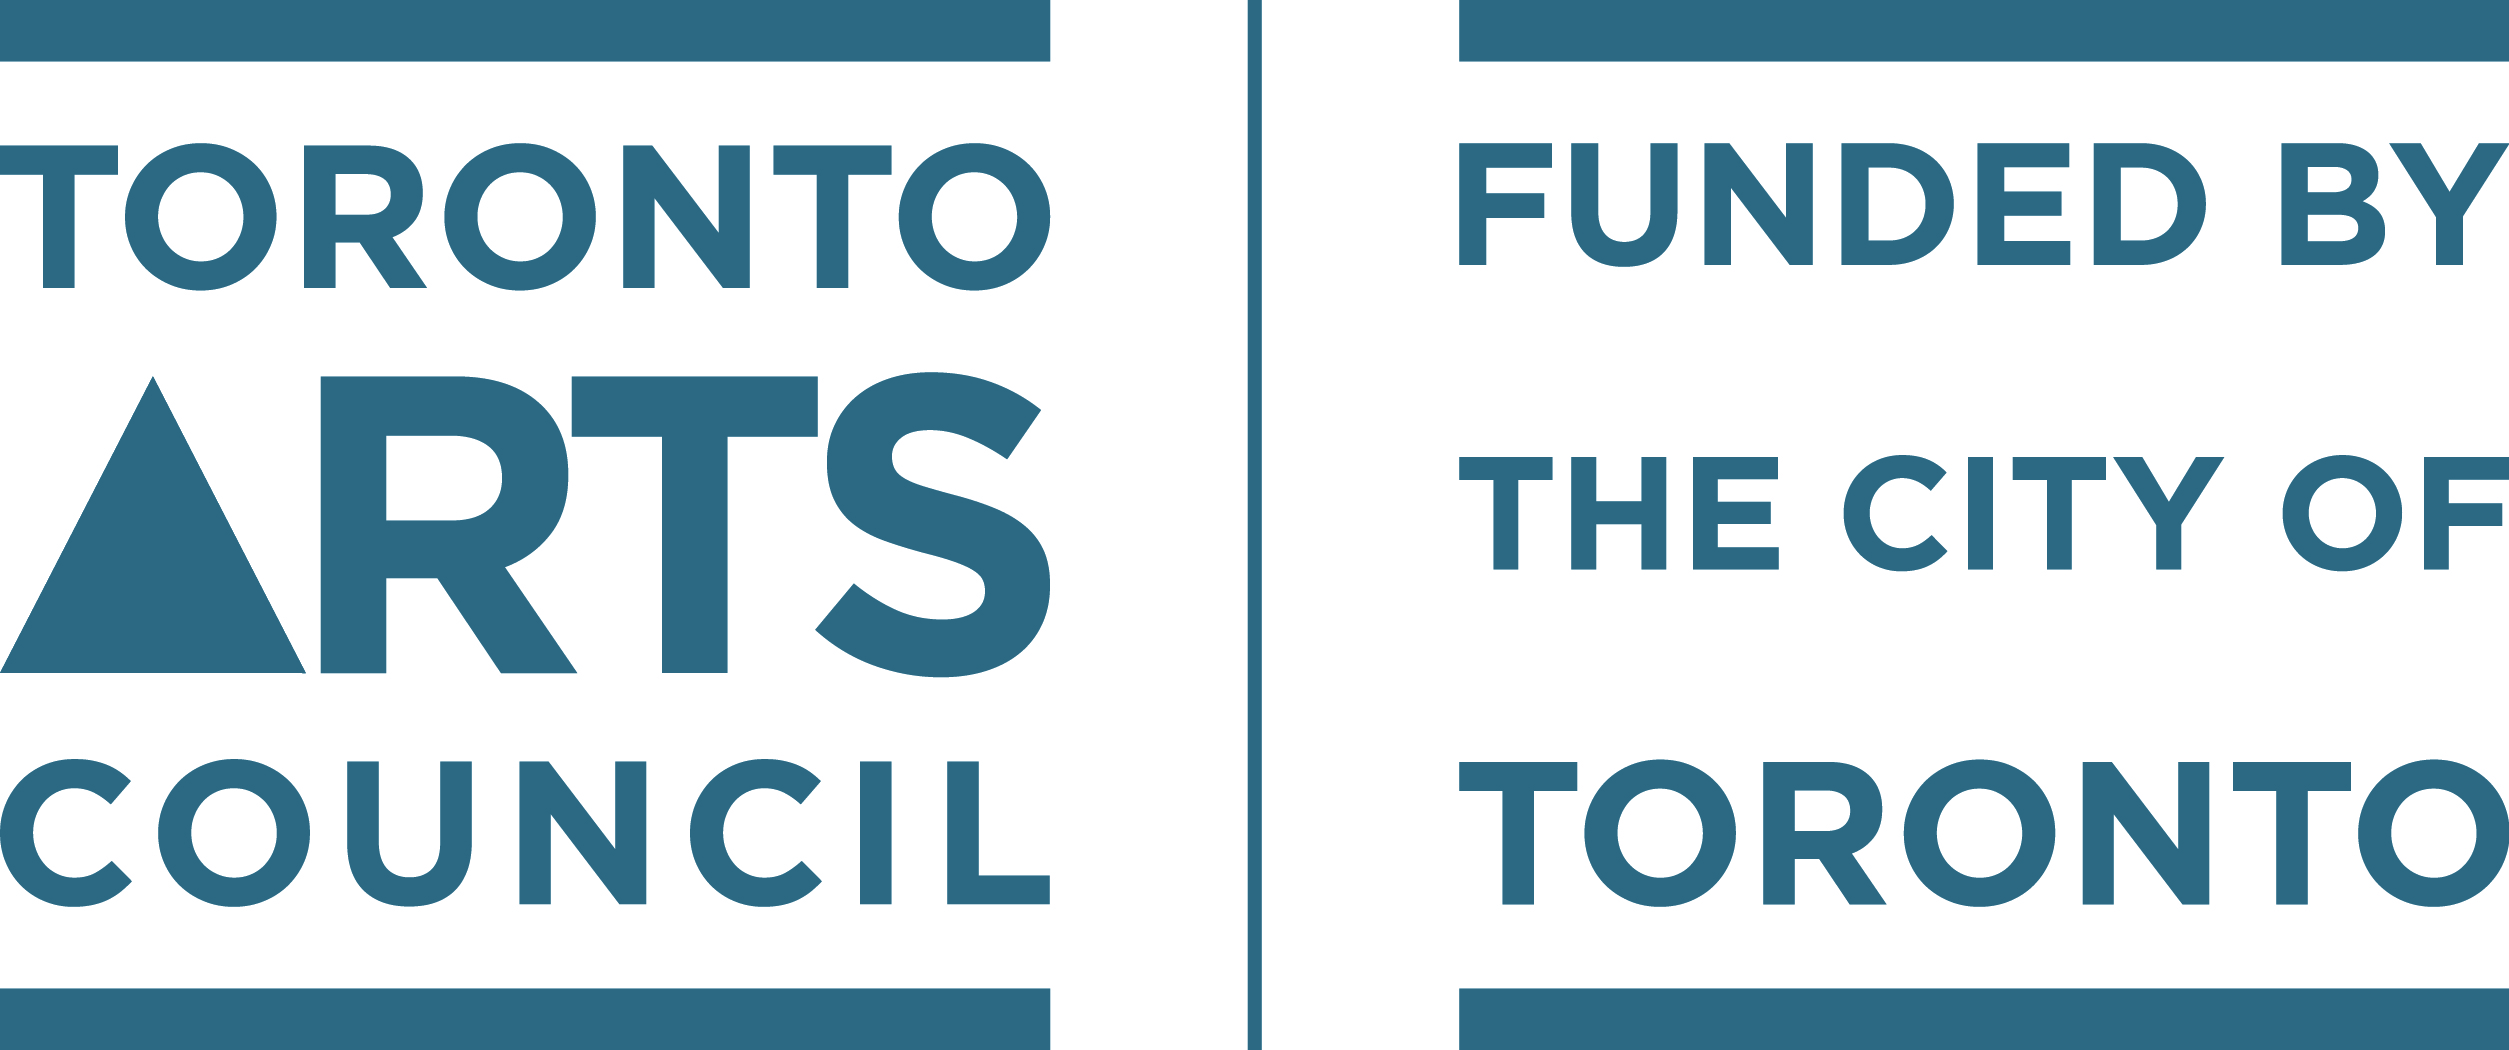 Toronto Arts Council (logo) Funded by the City of Toronto